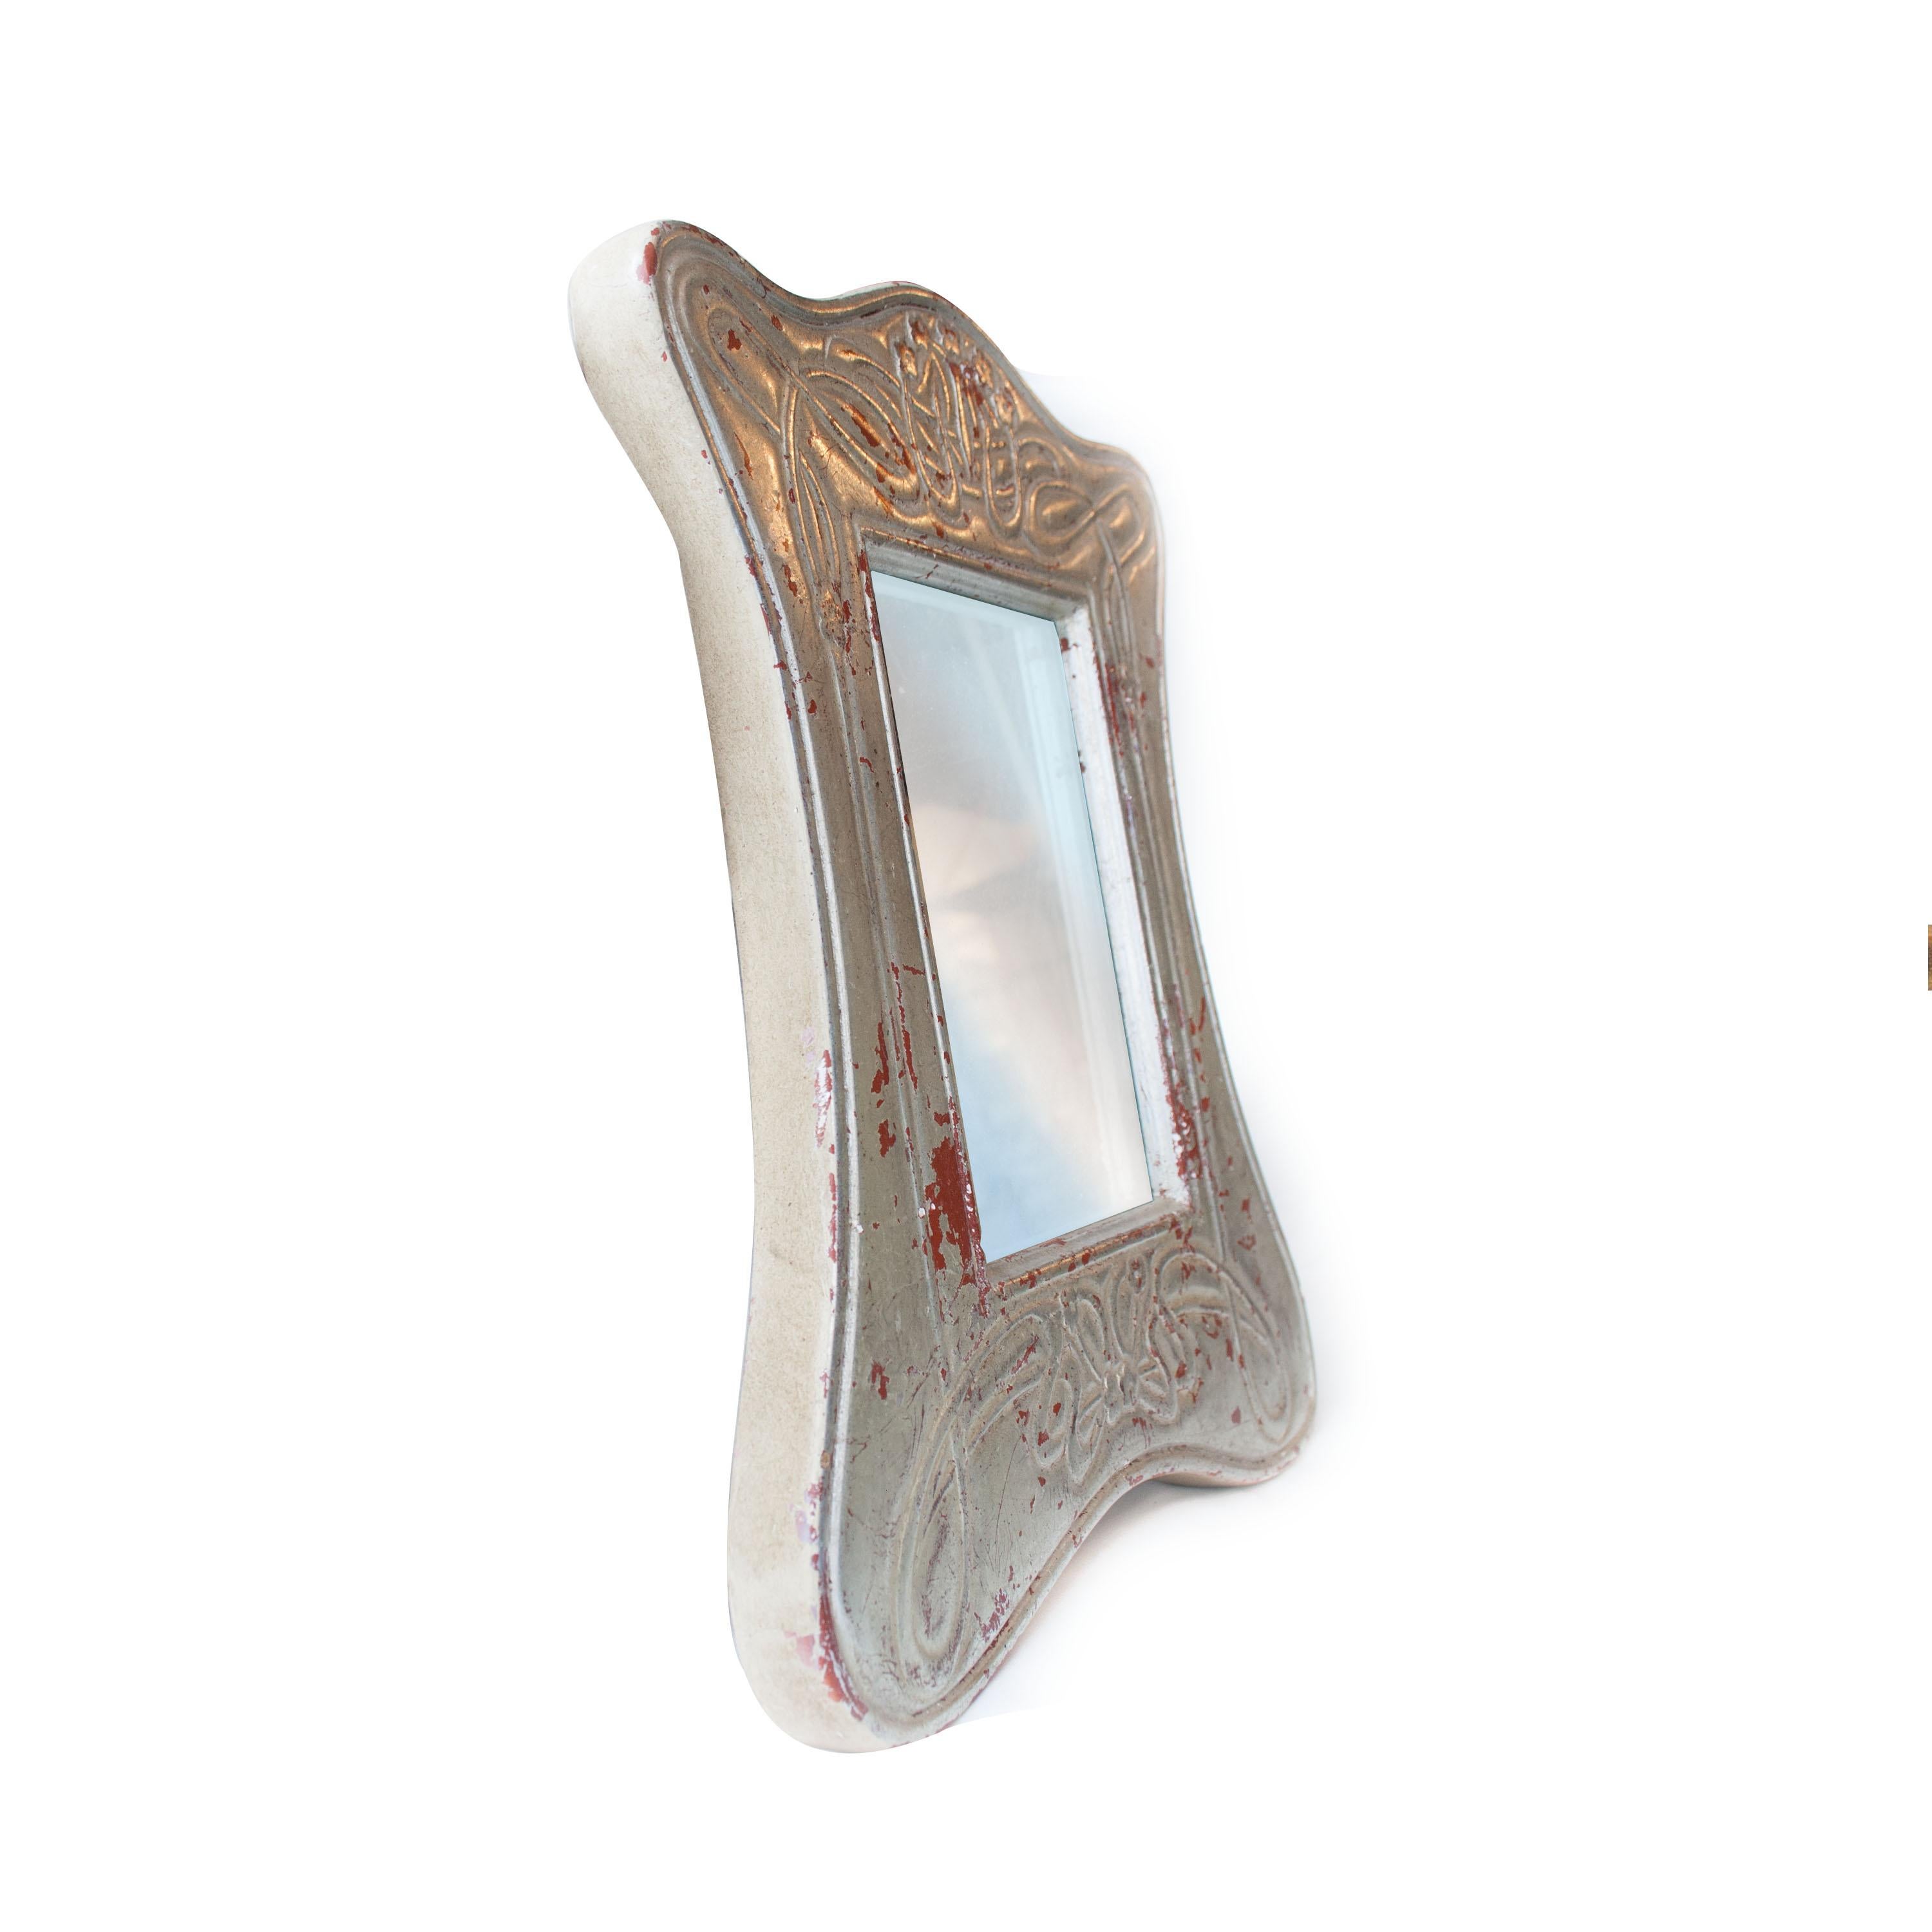 Art Nouveau handcrafted mirror. Rectangular hand carved wooden structure with silver foil finished, Spain, 1970.